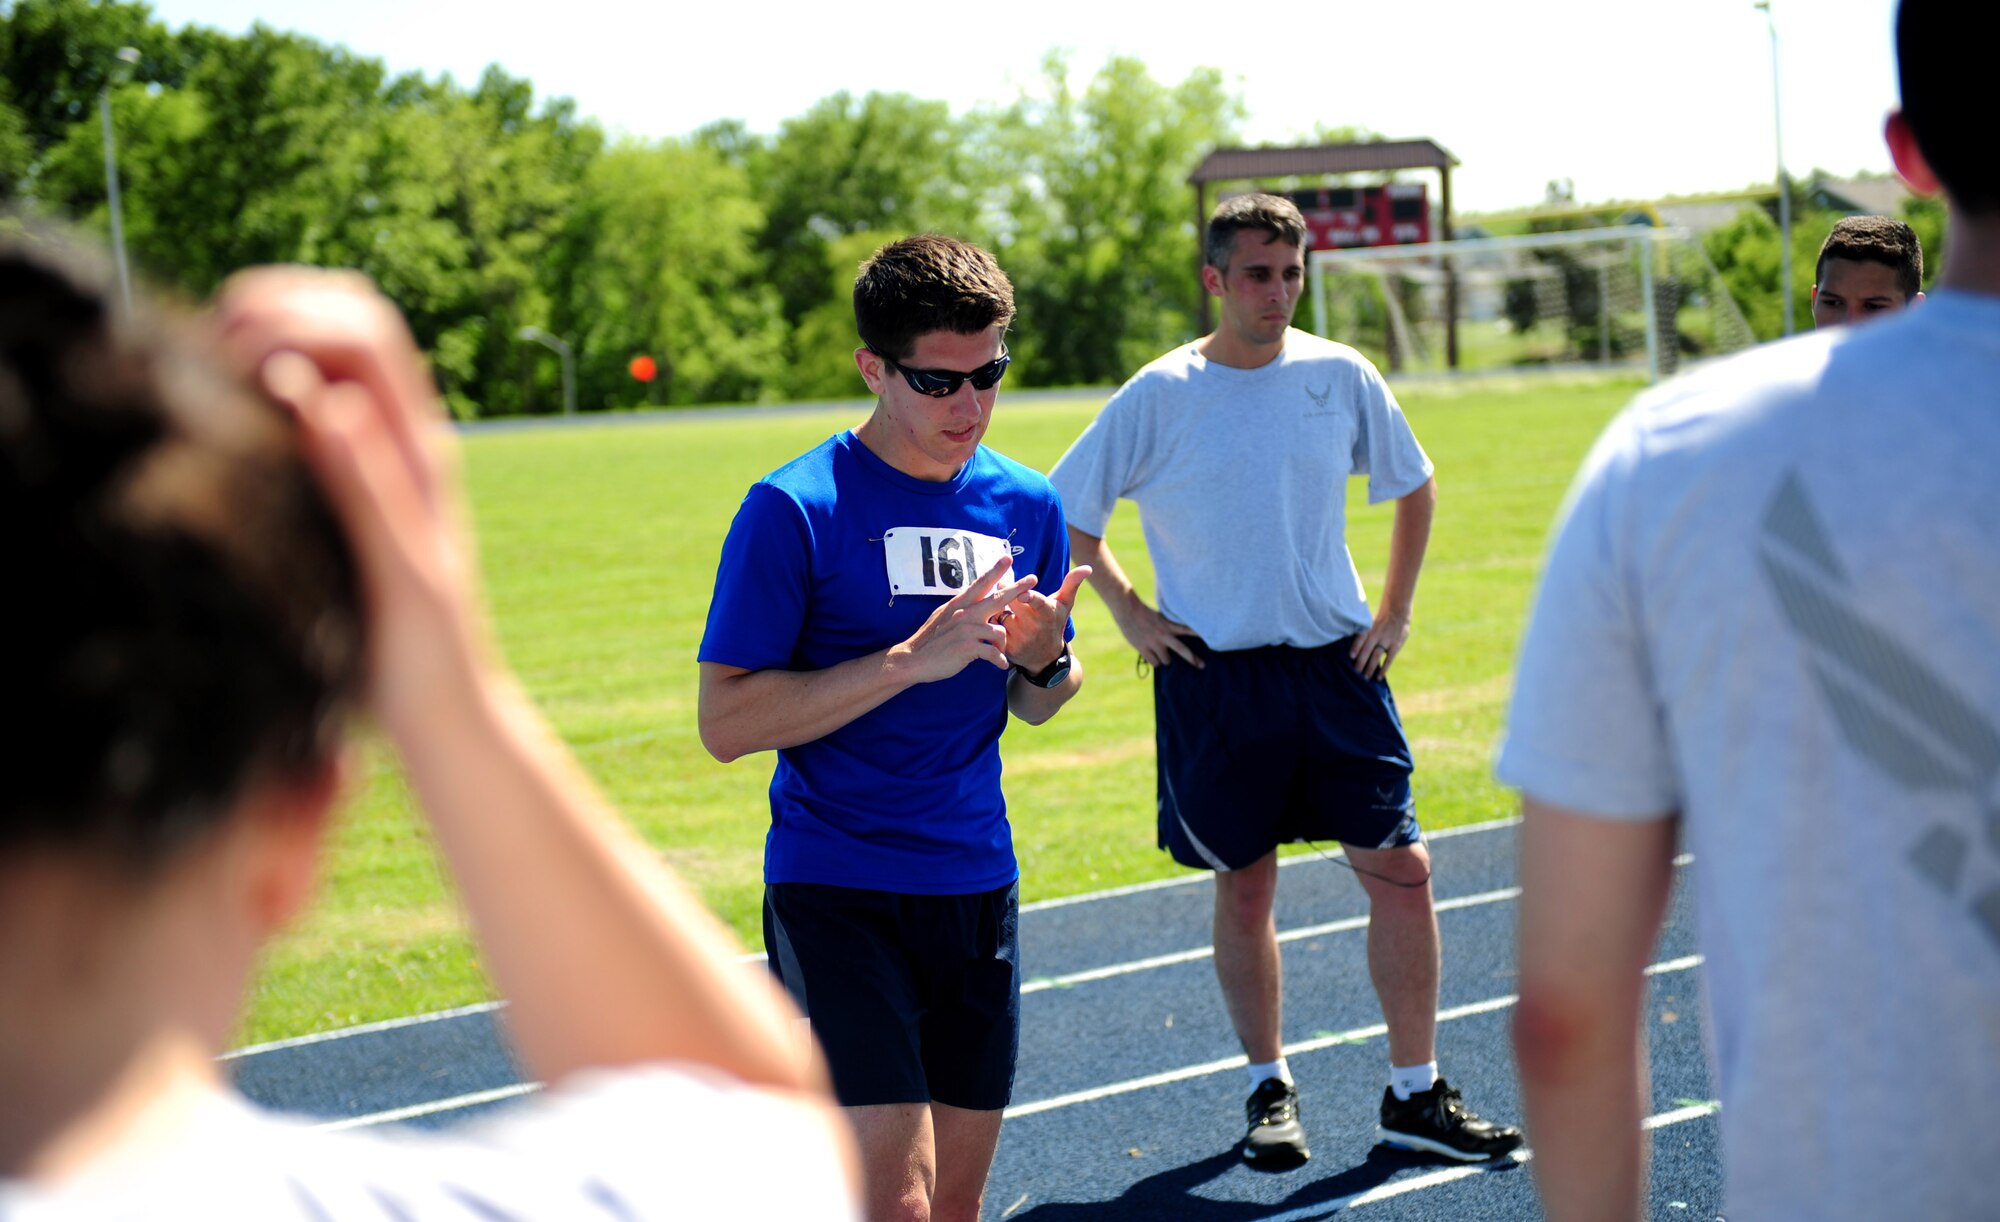 U.S. Air Force Staff Sgt. Brendan Brustad, 509th Medical Support Squadron NCO in charge of medical contracting, shares a few words after completing his 161-mile run at Whiteman Air Force Base, Mo., May 21, 2015. Brustad’s co-workers from the 509th MDSS joined him for the final stretch of his run. (U.S. Air Force photo by Senior Airman Joel Pfiester/Released)